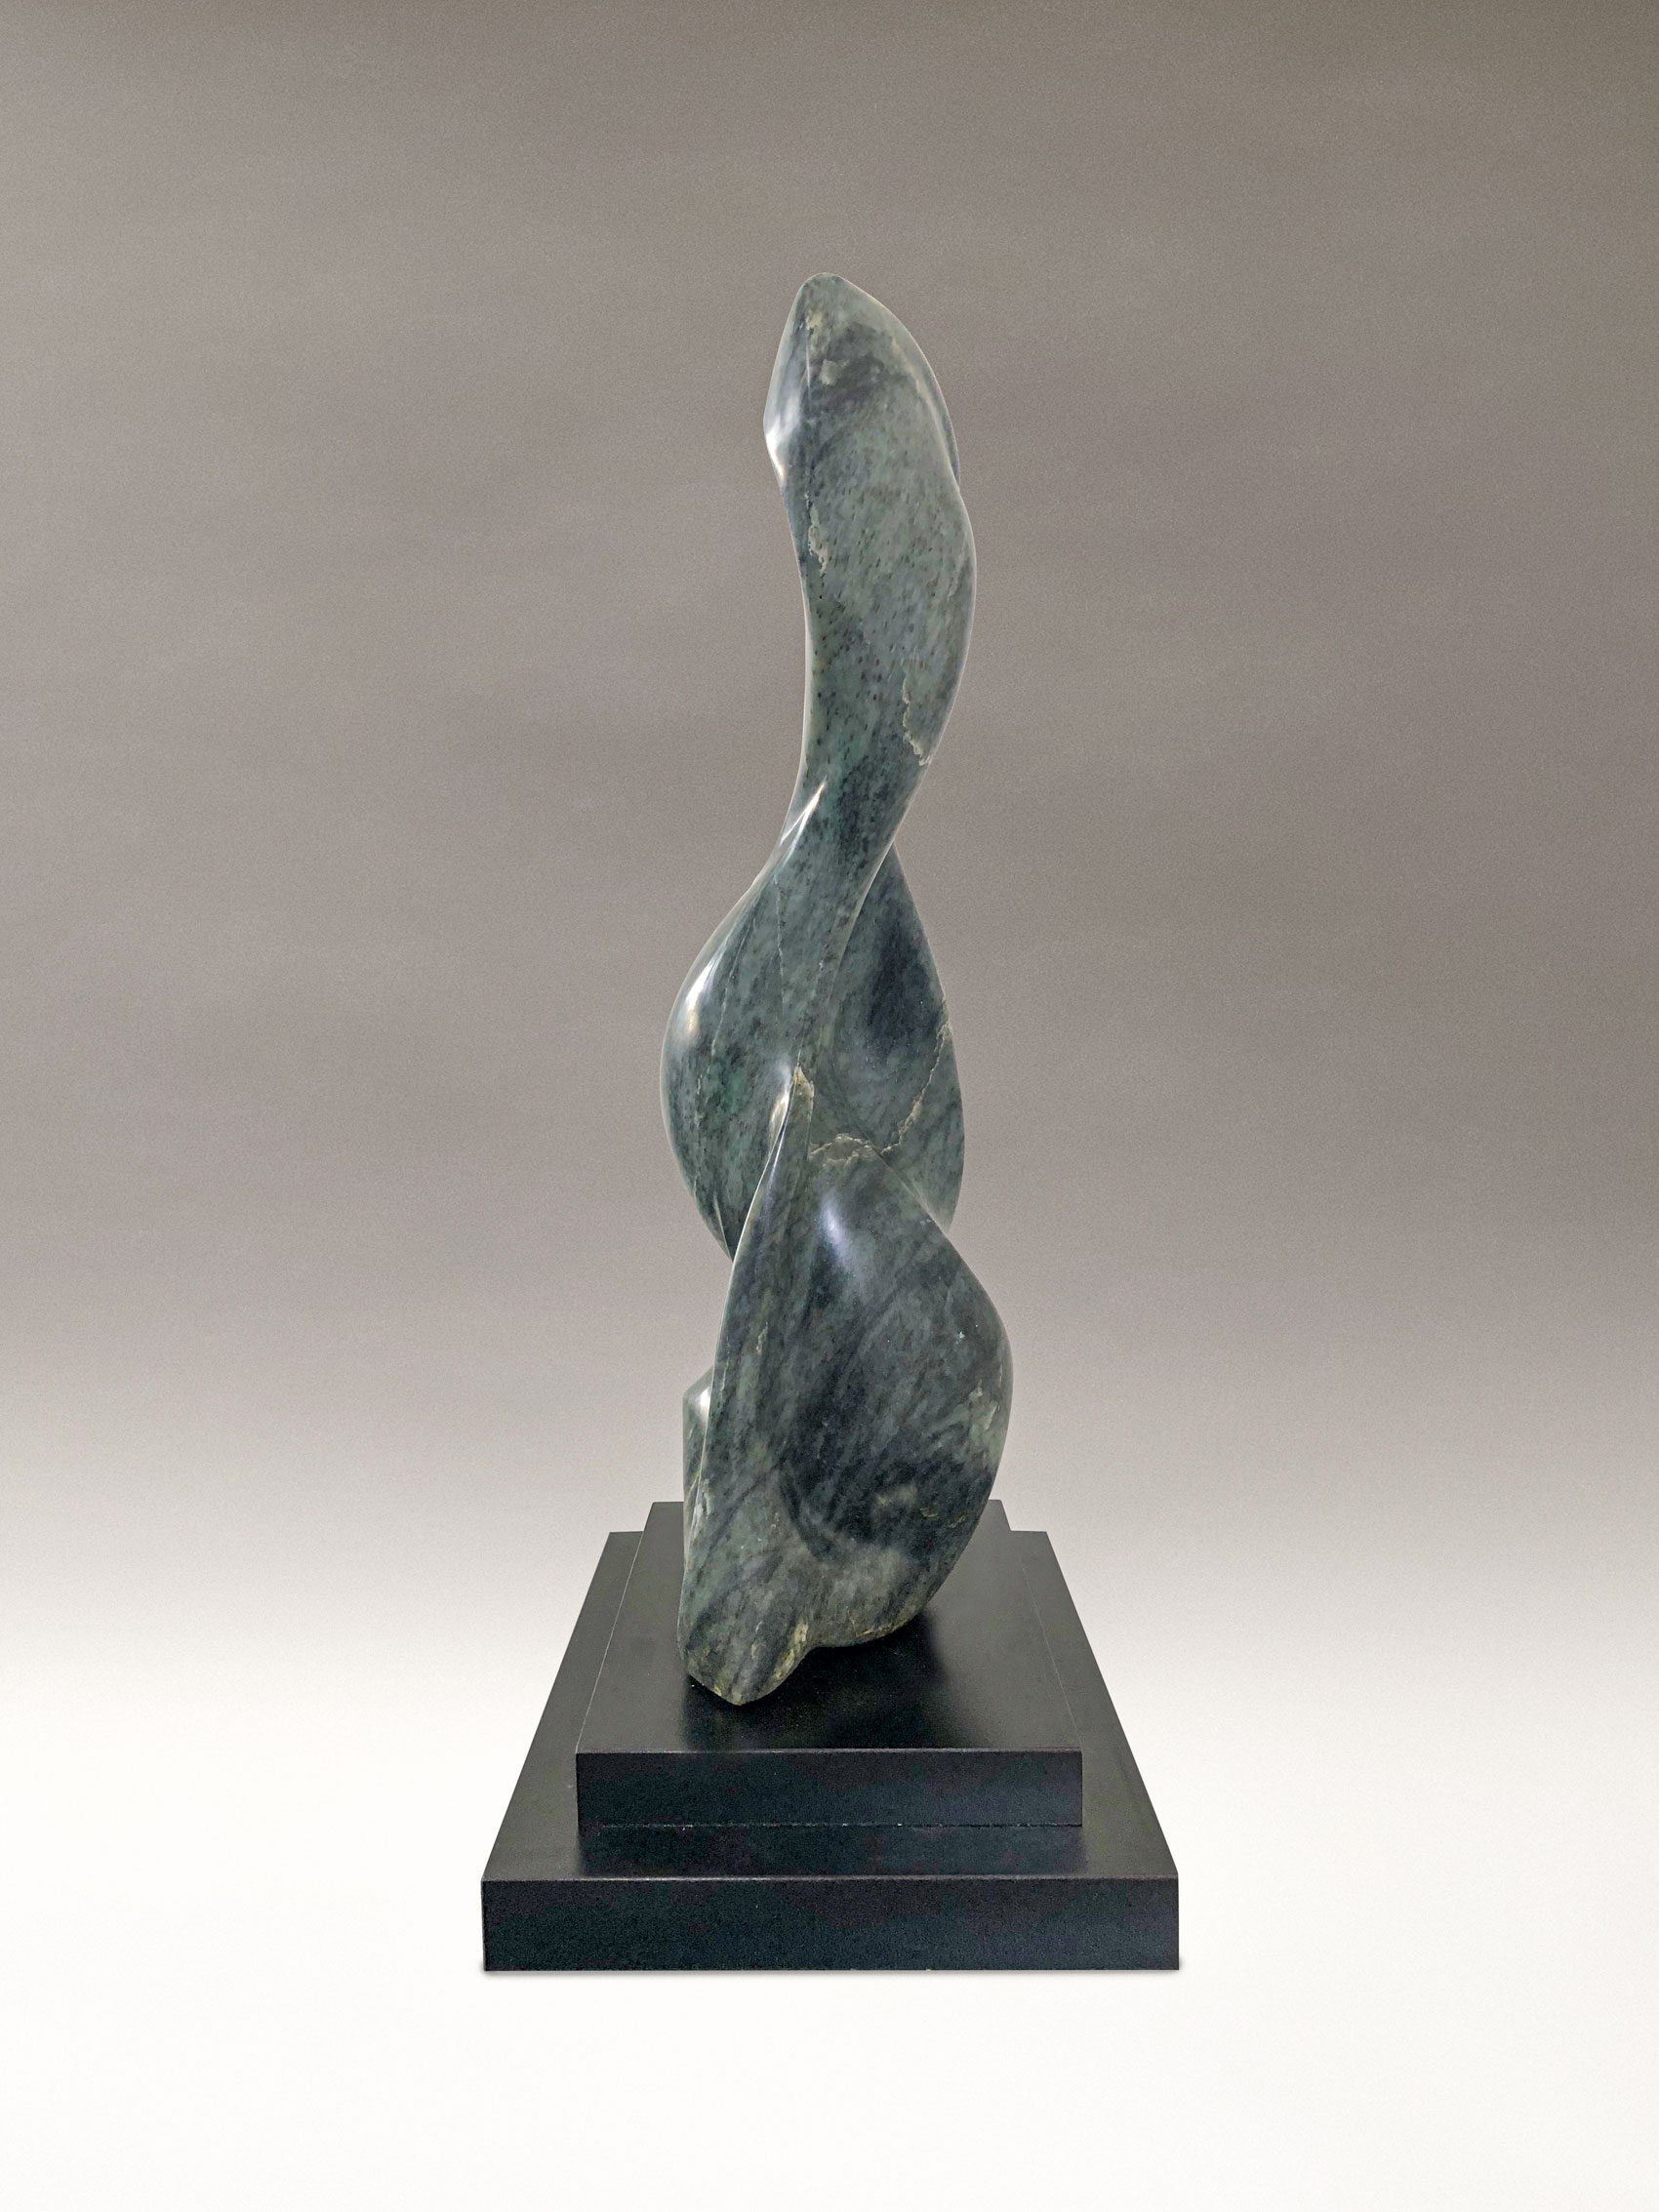 Abstract sculpture in Brazilian soapstone